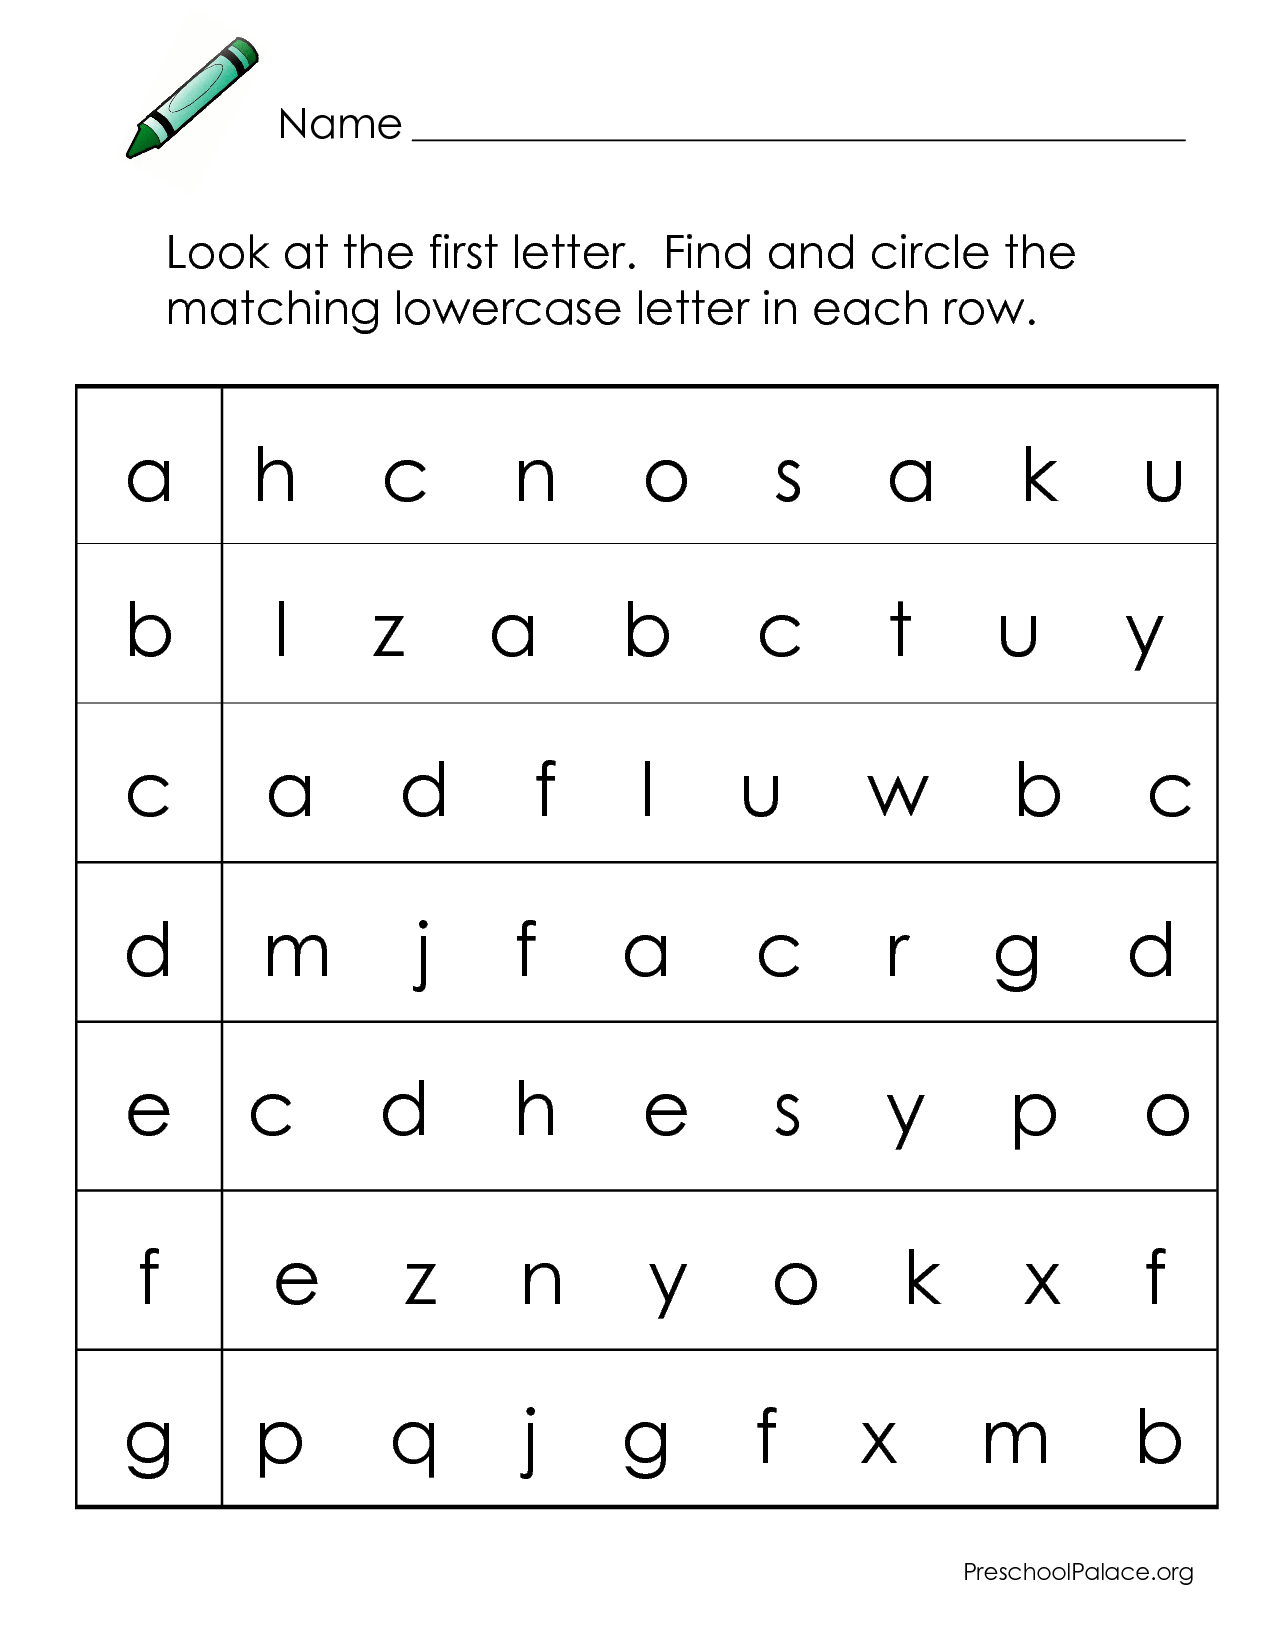 Abcs - Letter Matching A-G Lowercase | Letter Recognition with Alphabet Letters Worksheets Grade 2